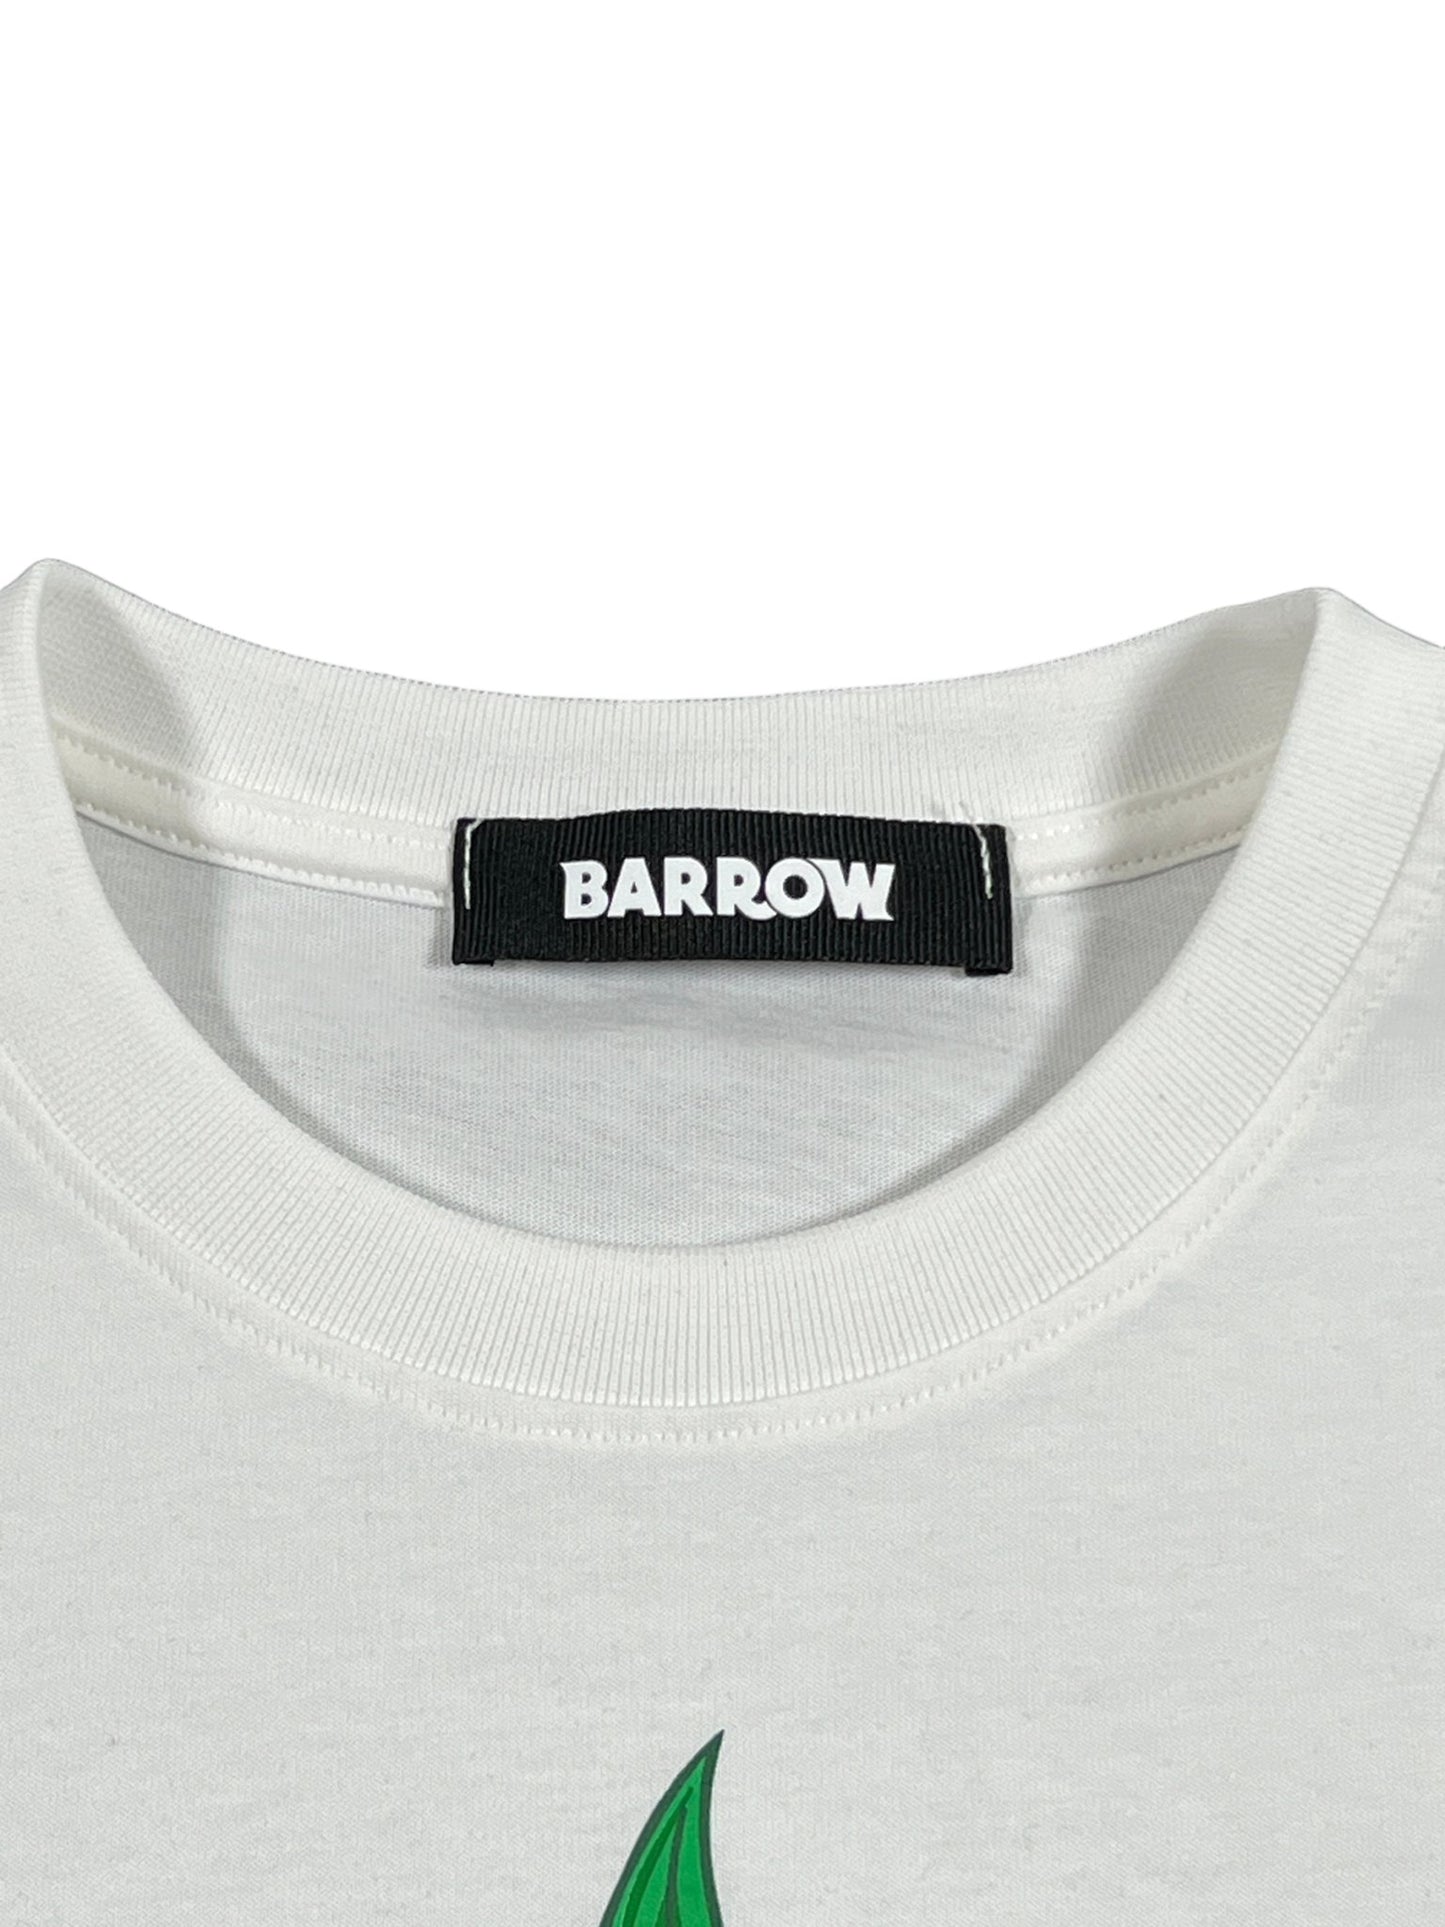 White BARROW S4BWUATH036 JERSEY T-SHIRT UNISEX with a BARROW brand label on the collar.